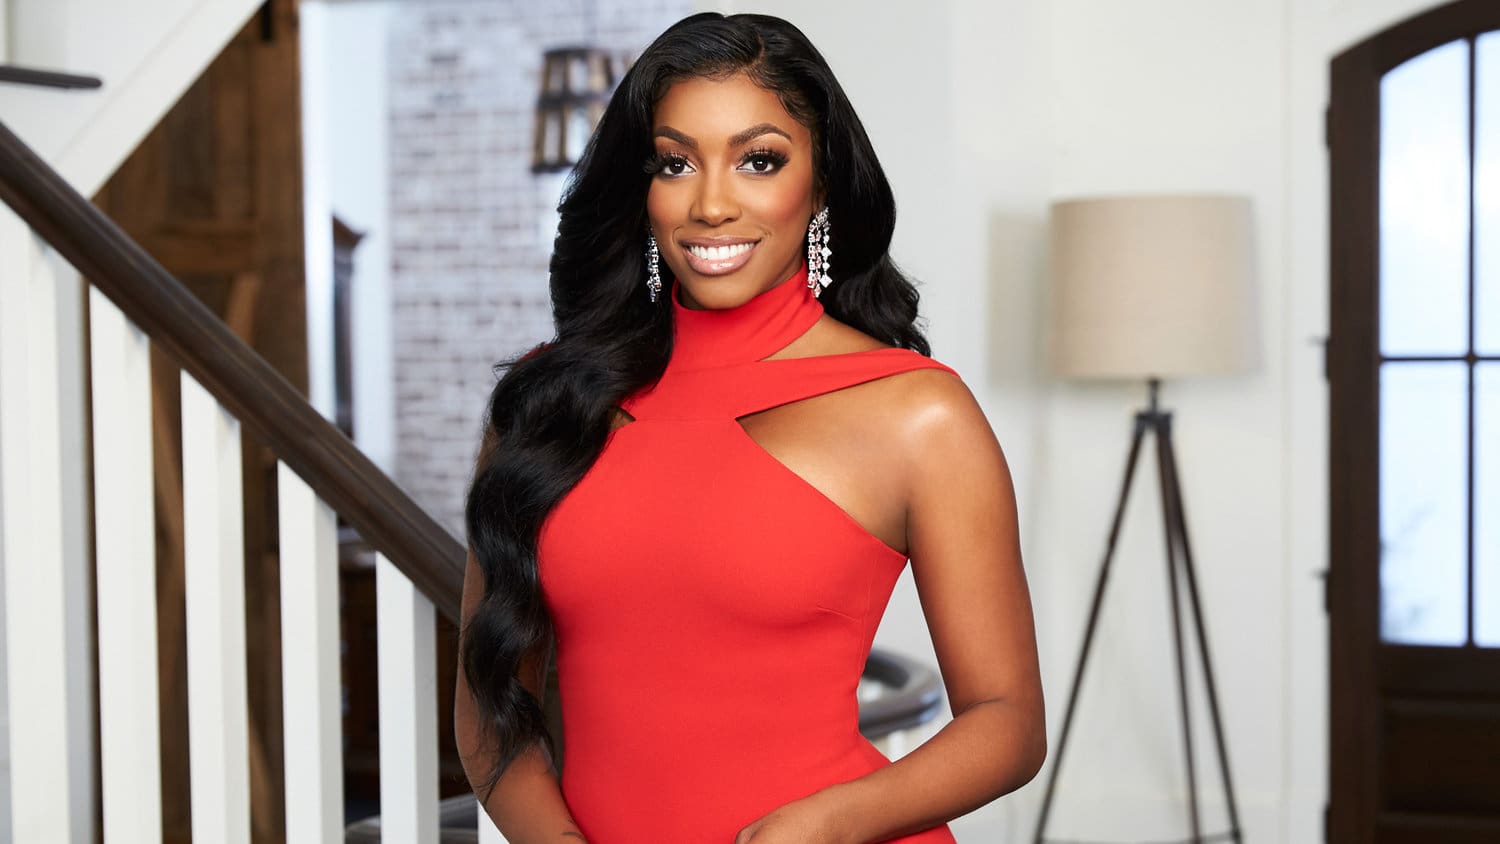 View this post on Instagram A post shared by #PorshaWilliams (@porsha4real)